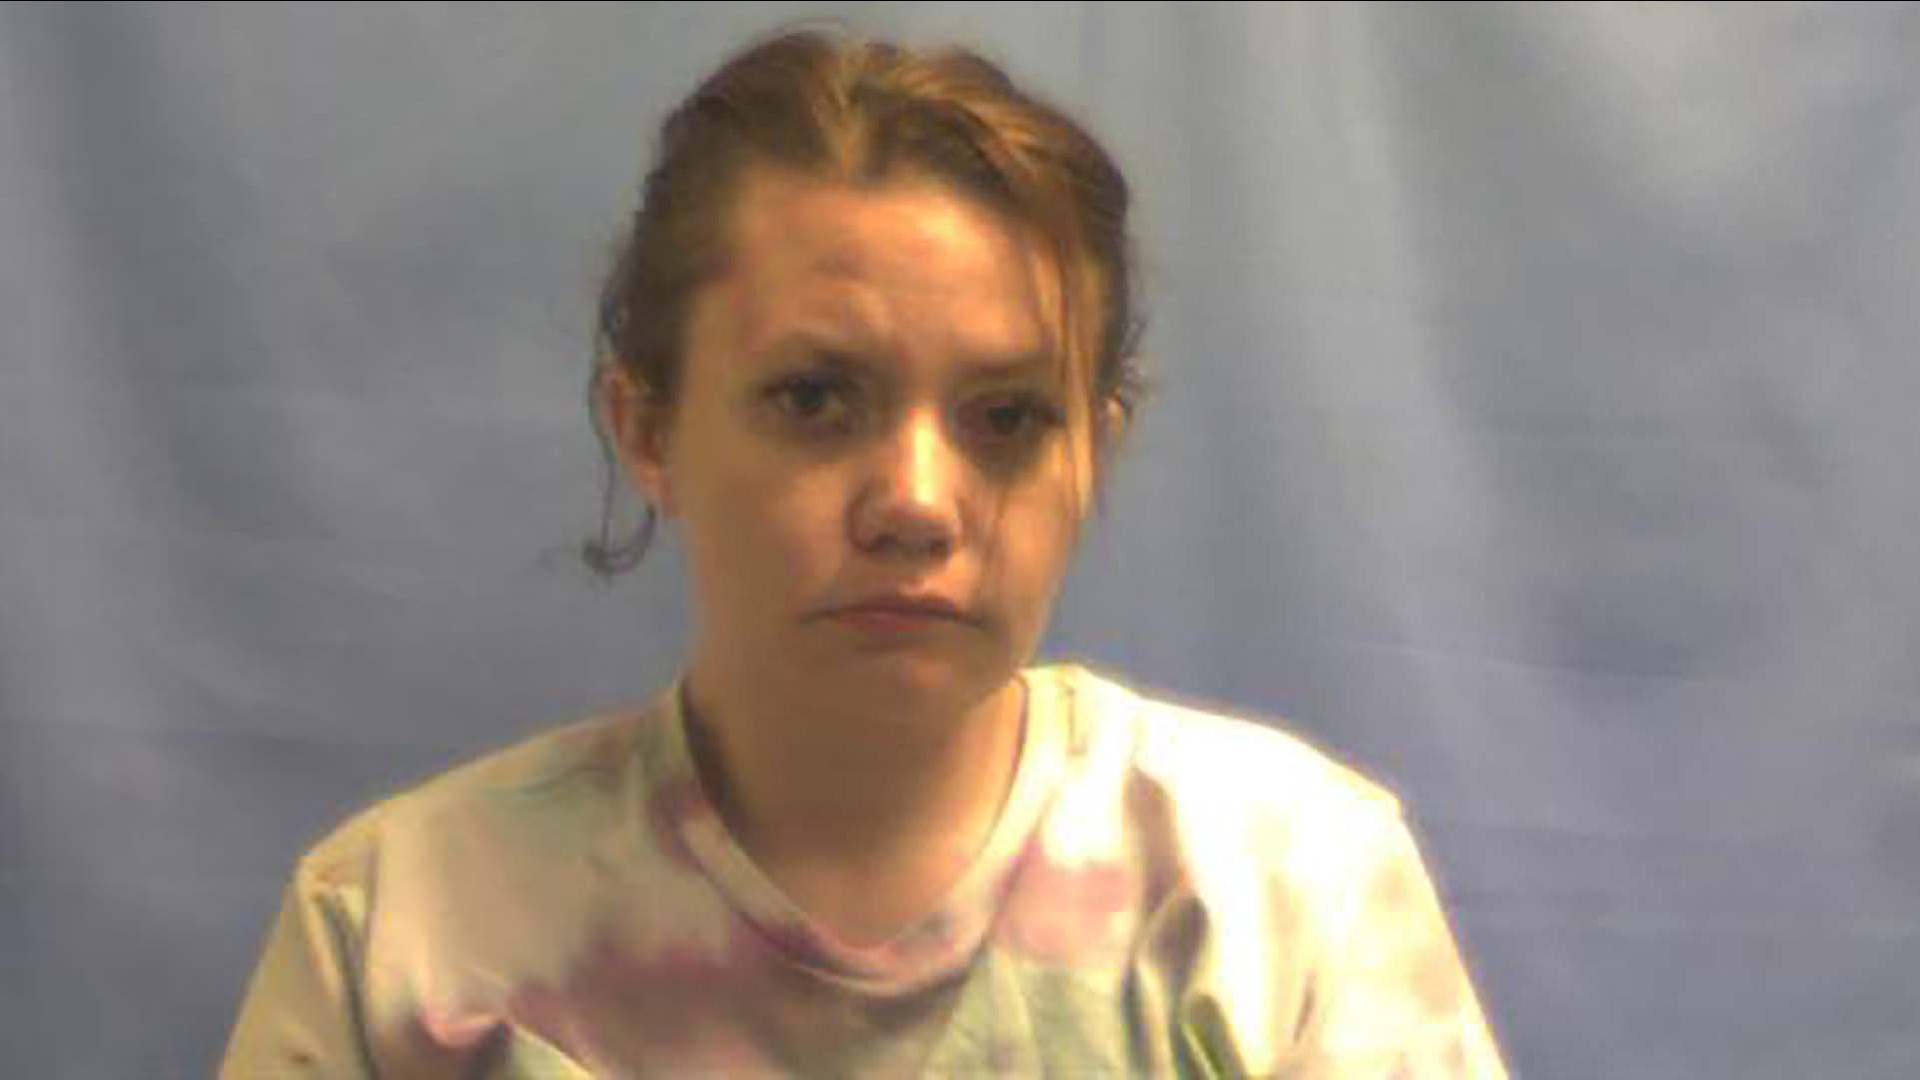 Rachael Dukes told police "she was holding some meth and it accidentally fell into the bottle" before feeding it to her son, the affidavit says.